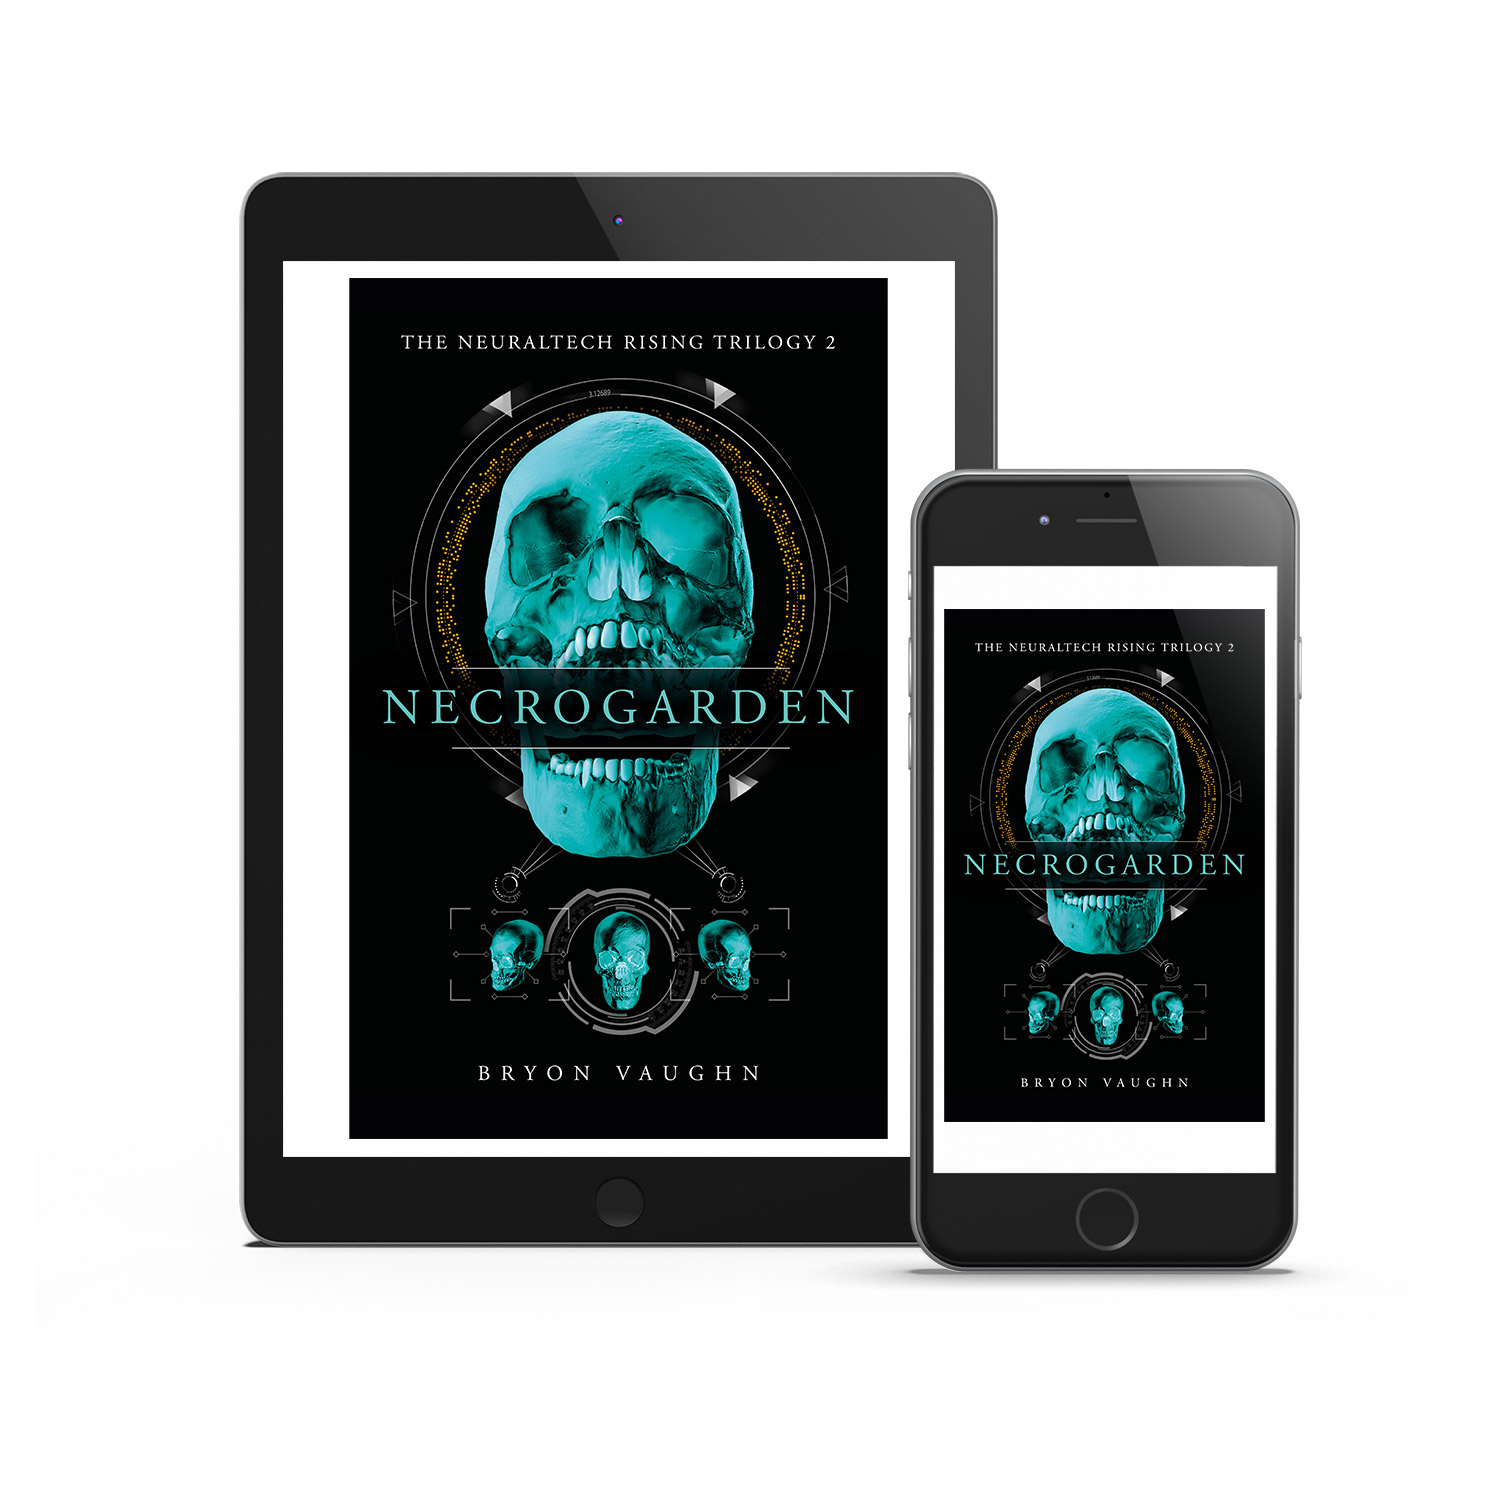 'Necrogarden' is a classy cyber thriller by author Bryon Vaughn. The book cover design is by Mark Thomas. To learn more about what Mark could do for your book, please visit coverness.com.